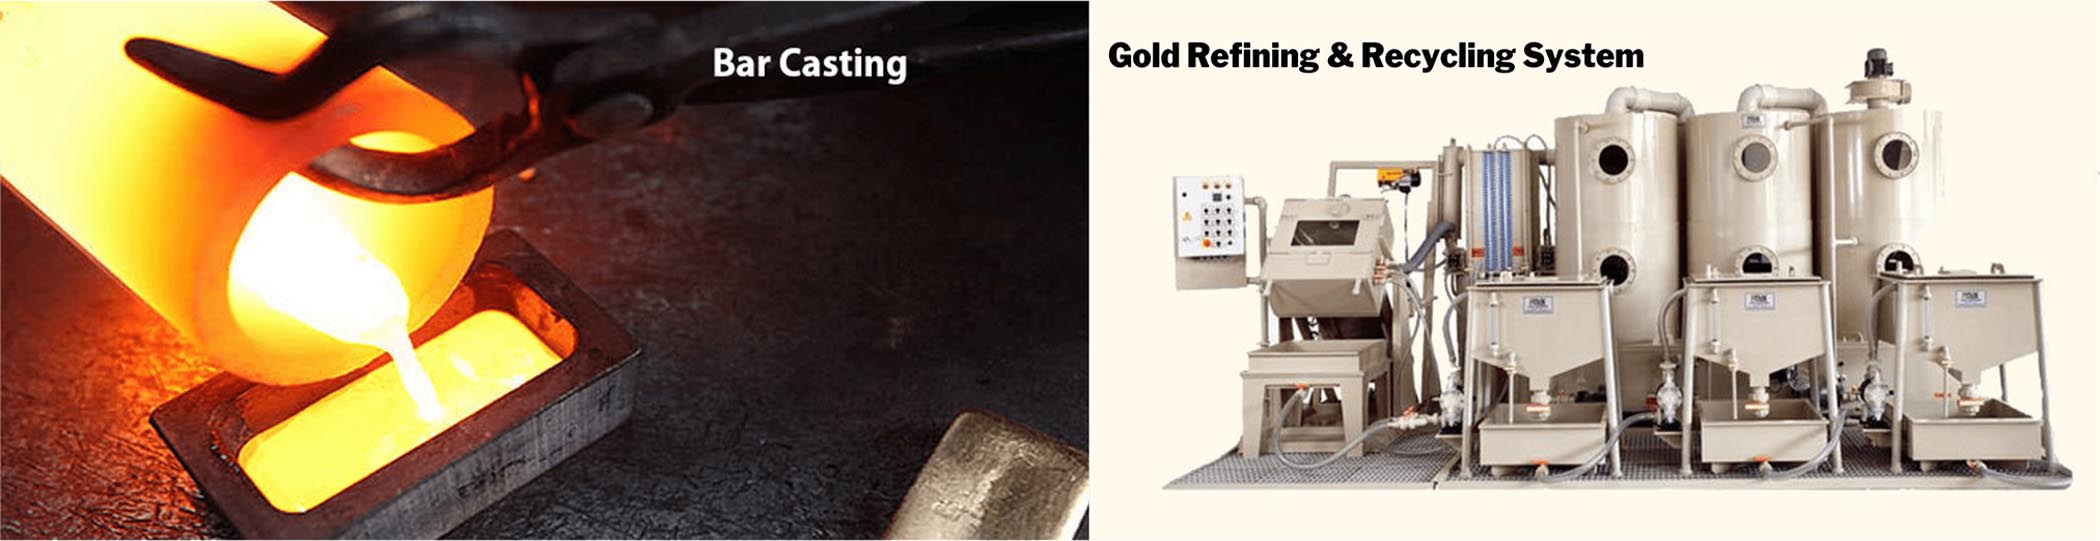 Bar Casting/Gold Refining & Recycling System